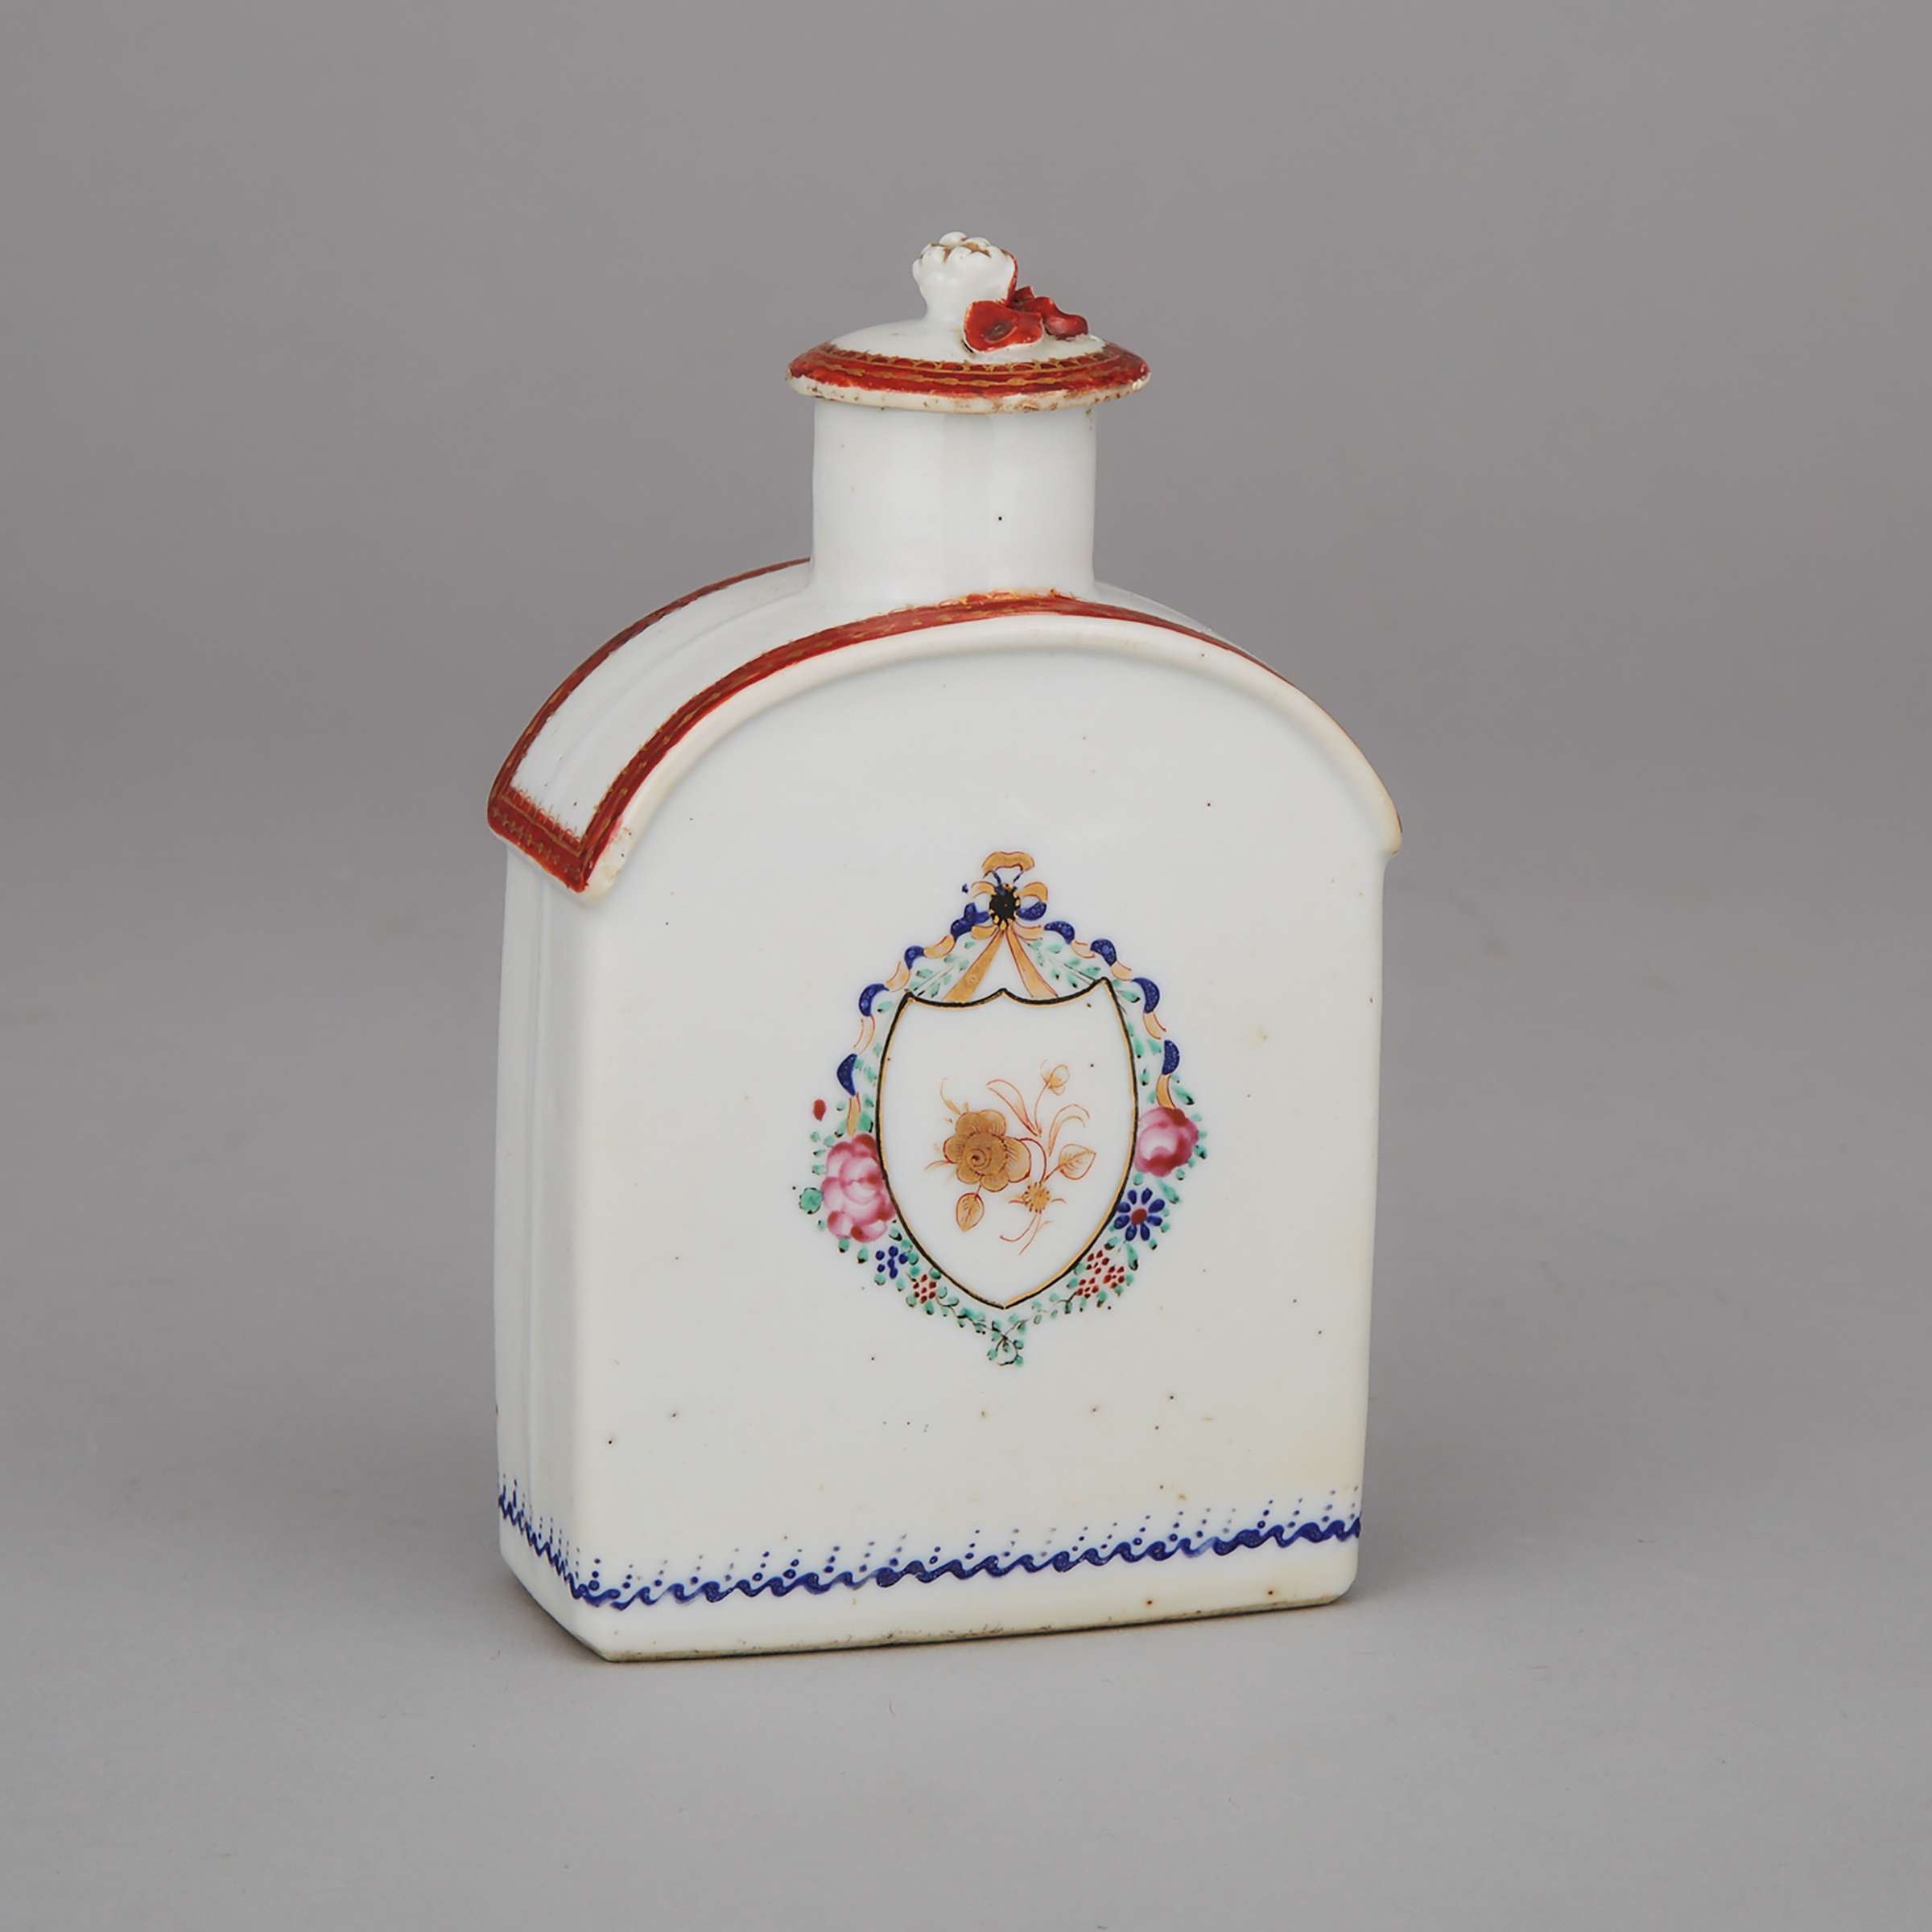 Chinese Export Porcelain Tea Canister, c.1780